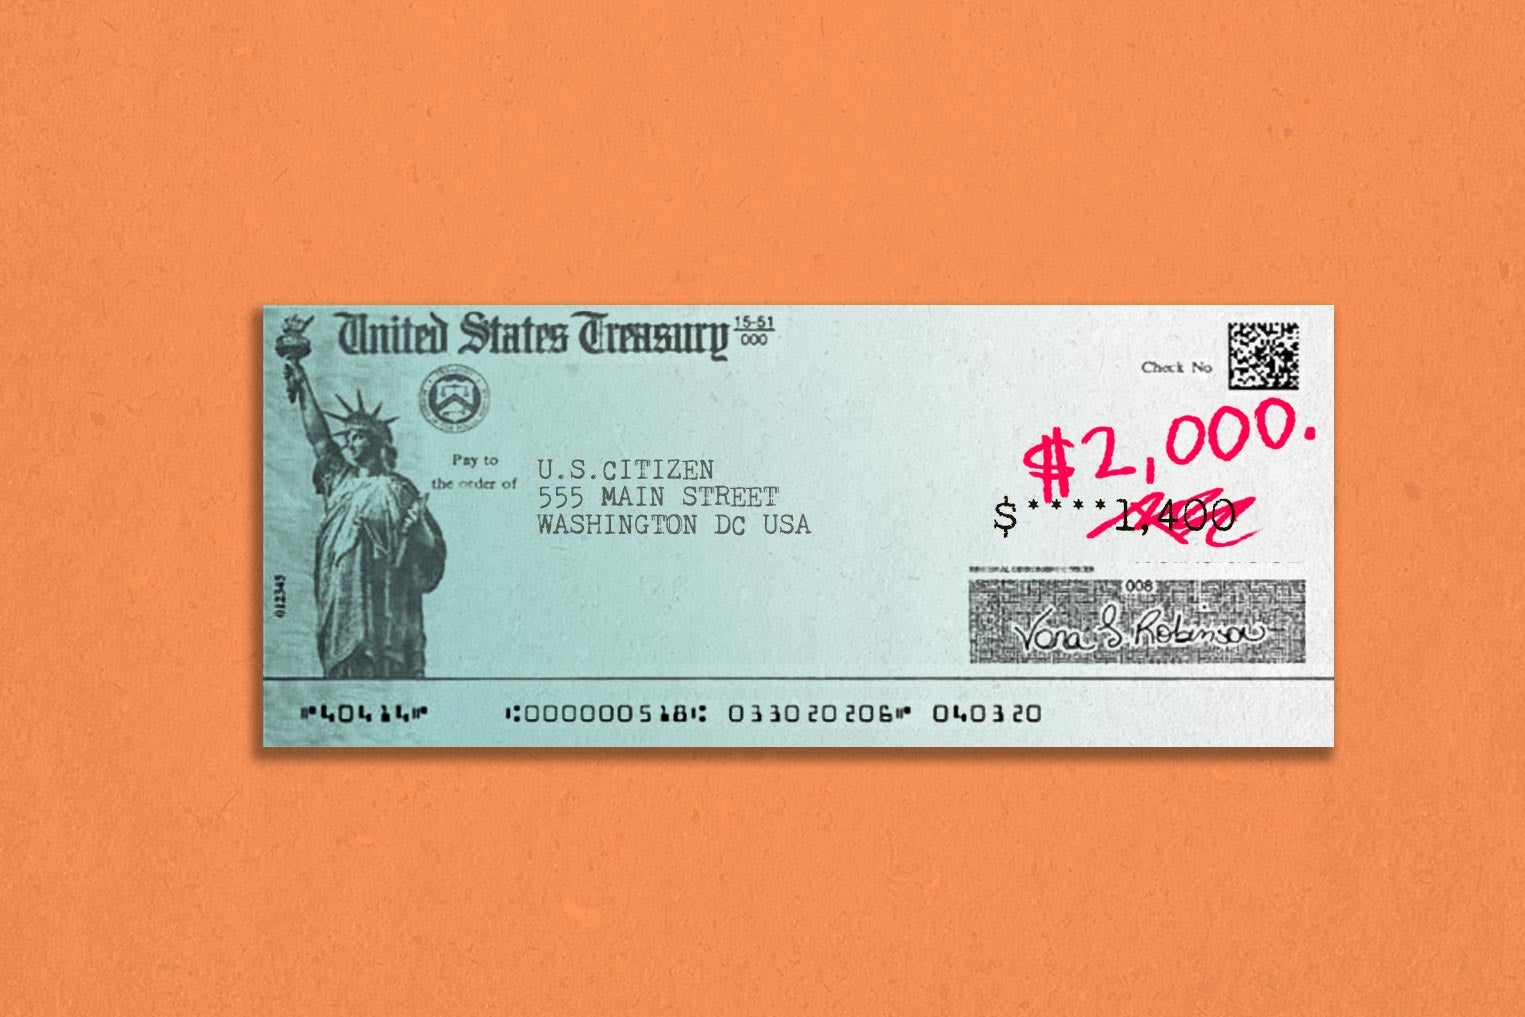 A U.S. Treasury check for $1,400 on which the $1,400 has been crossed out with red pen, with $2,000 written above it.